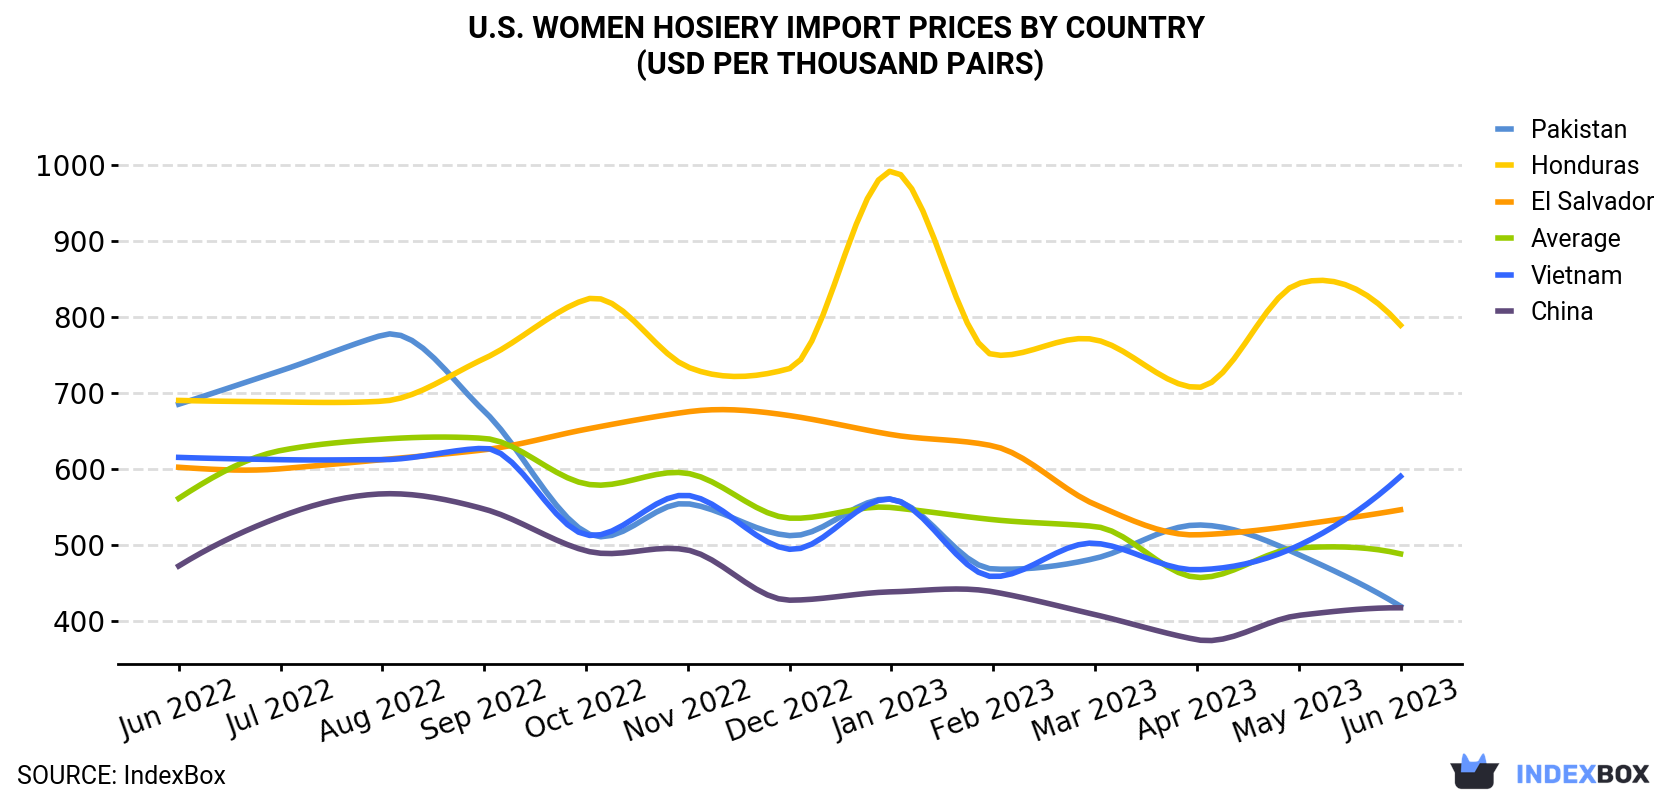 U.S. Women Hosiery Import Prices By Country (USD Per Thousand Pairs)